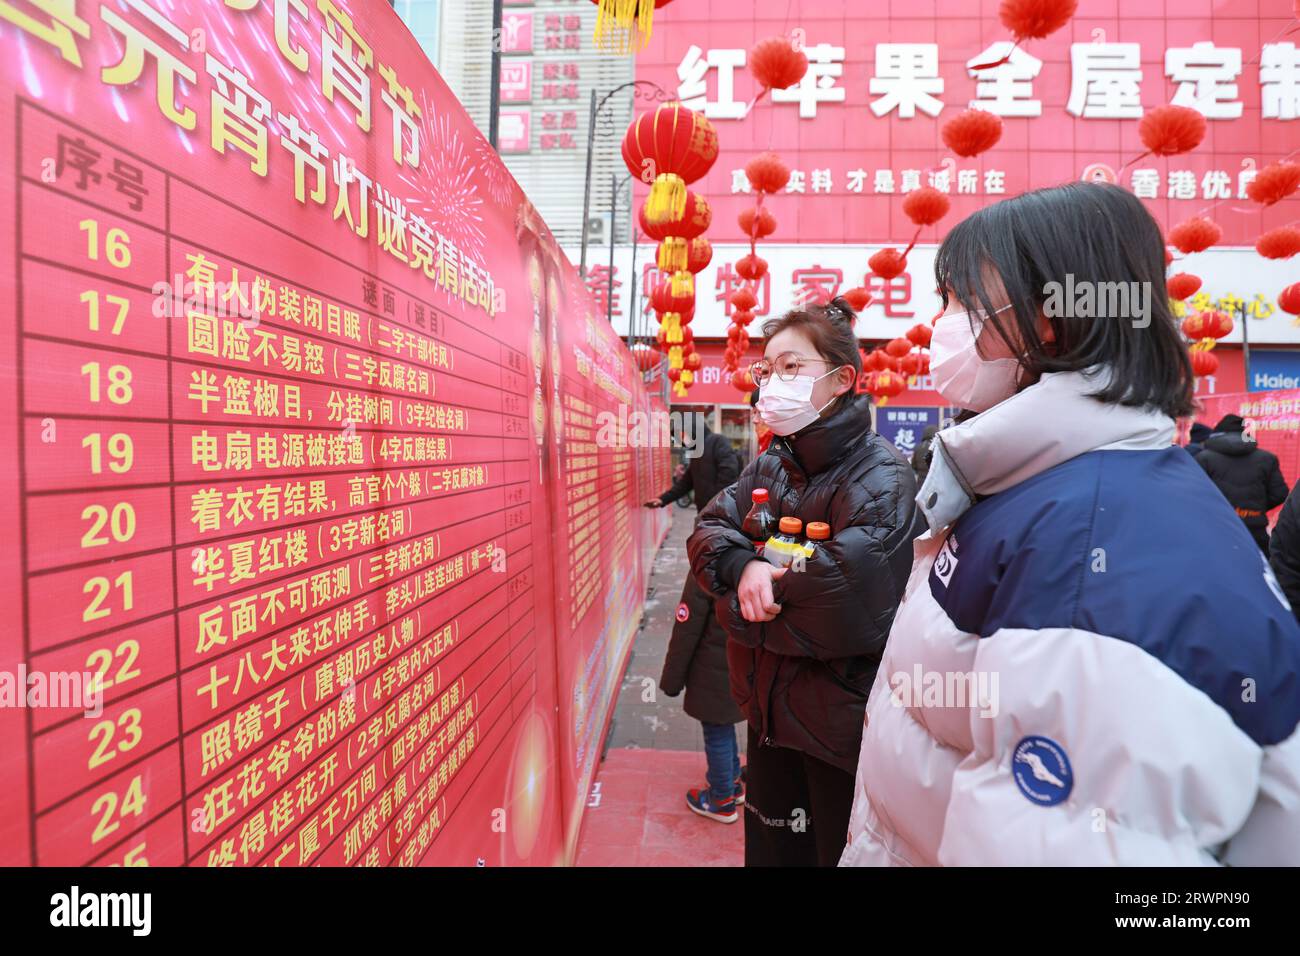 LUANNAN COUNTY, China - February 15, 2022: people guess lantern riddles outdoors on the day of the Lantern Festival, North China Stock Photo